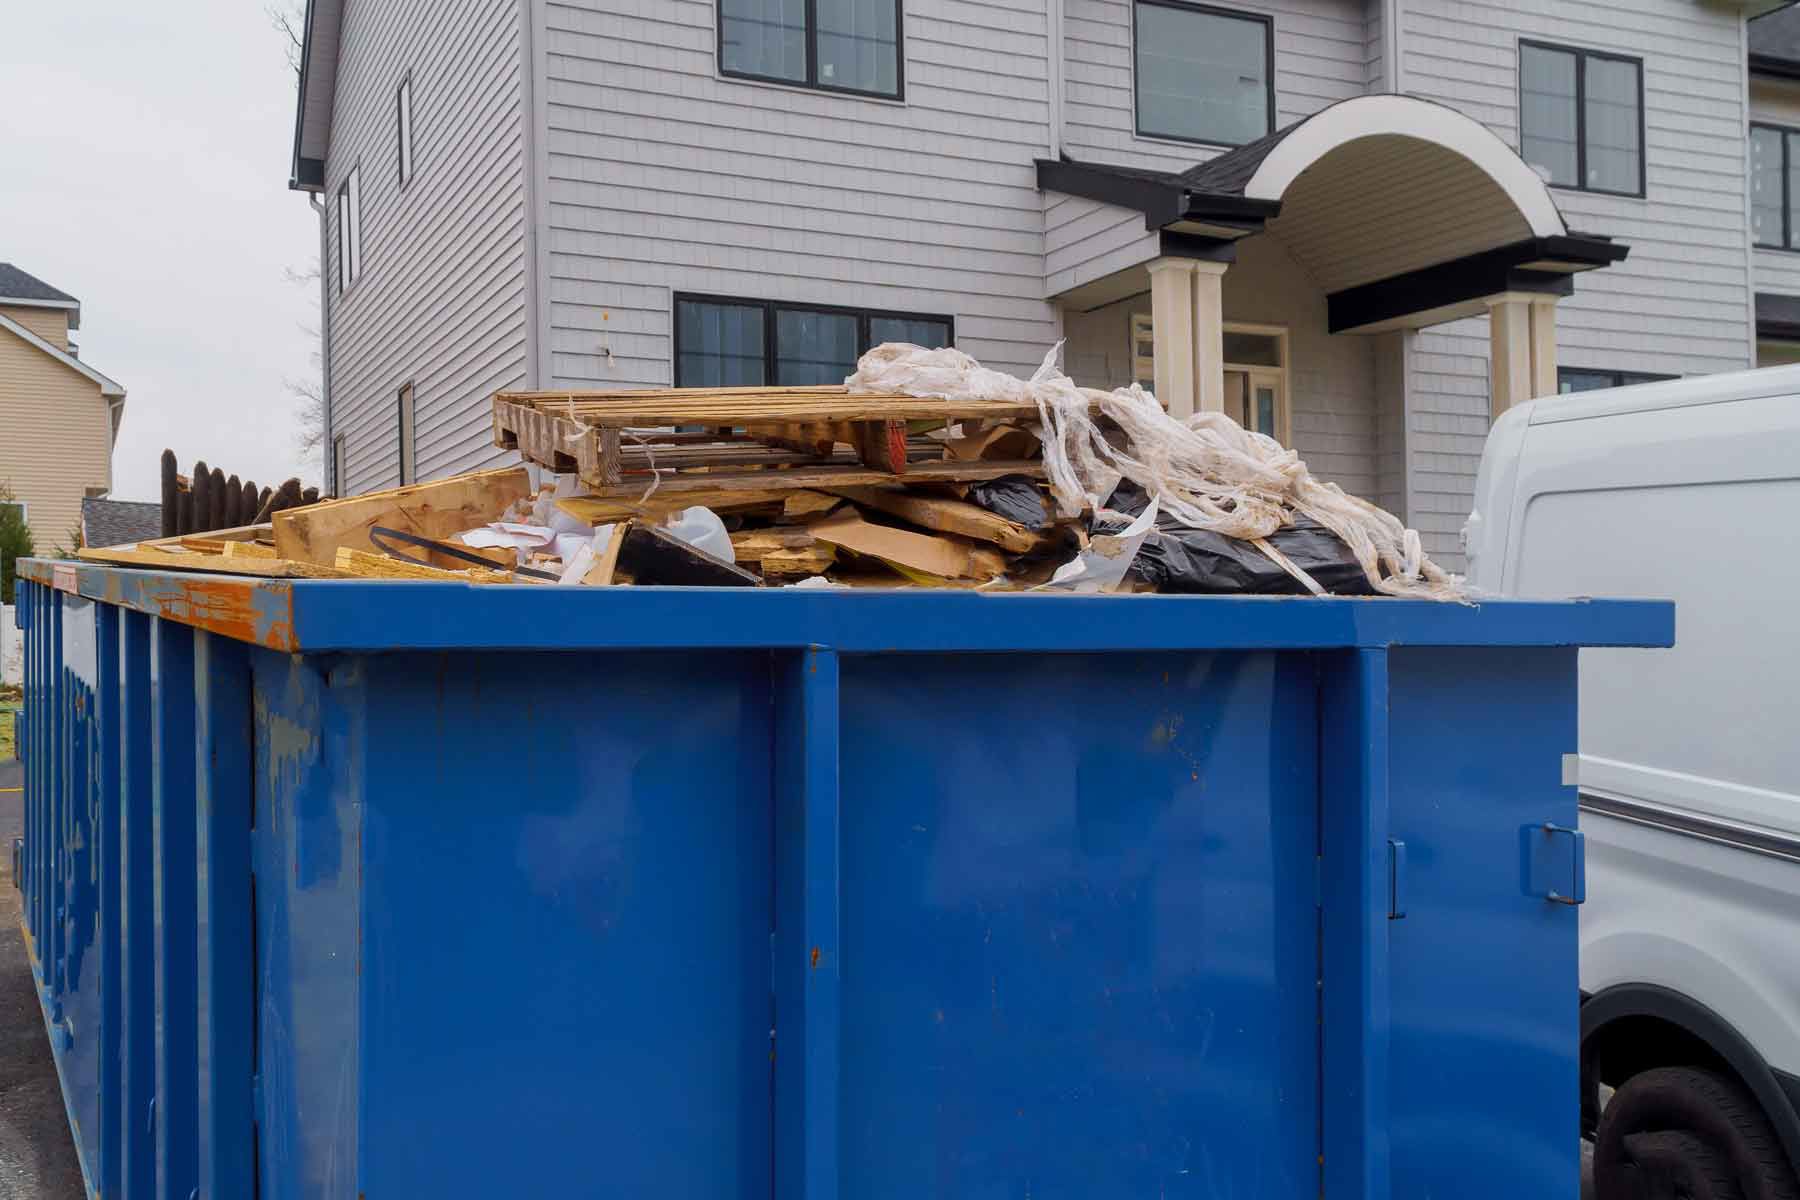 Why Rent a Dumpster For a Demolition Job?